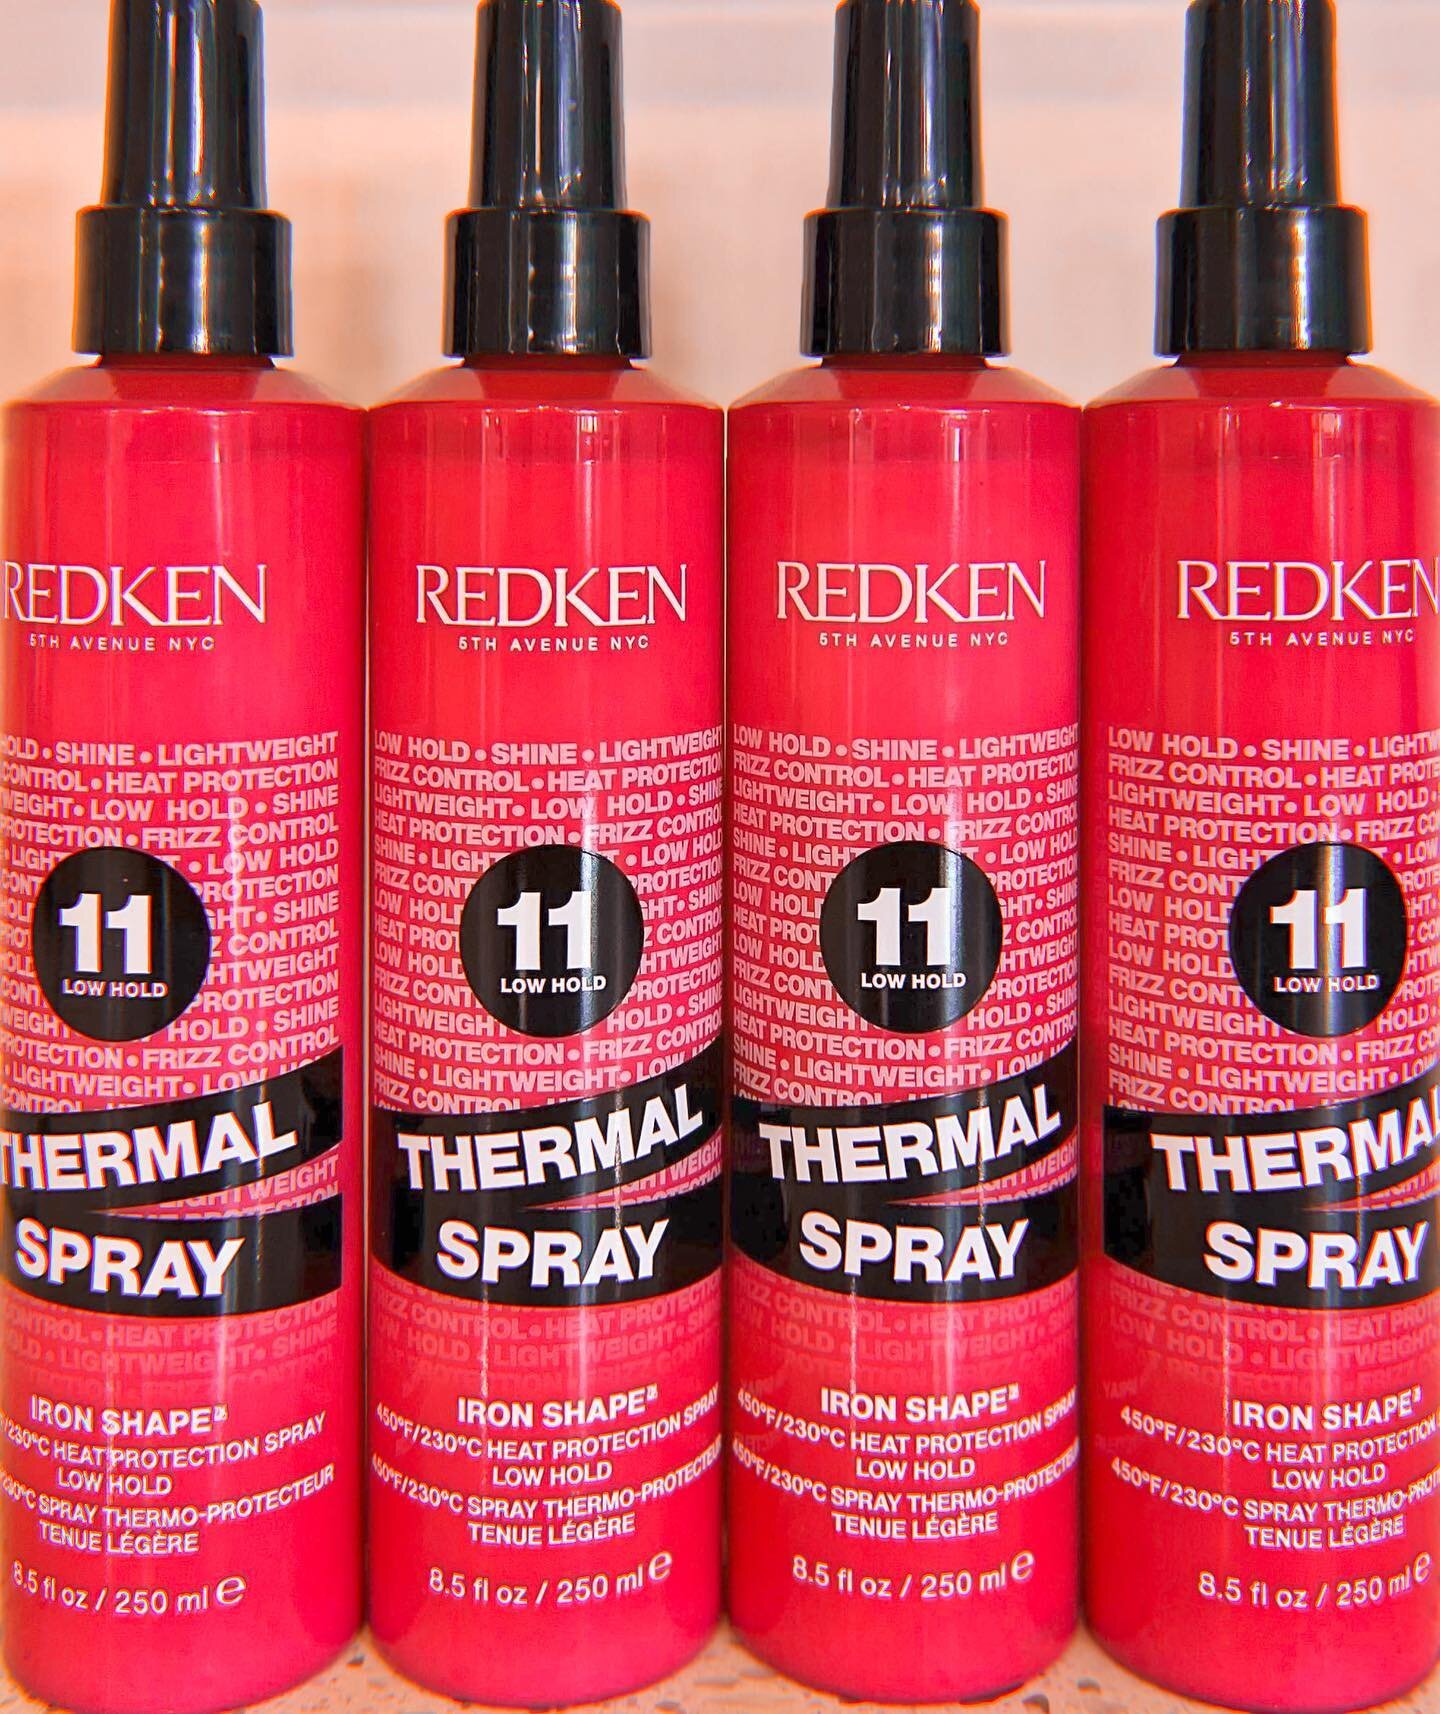 Thermal Spray 11 Low Hold is a thermal holding spray that protects and repairs hair for a silky smooth finish when heat styling. 

✅Lightweight thermal spray protects hair from heat up to 450&ordm;F/232&deg;C 
✅Protects and repairs heat damaged hair
